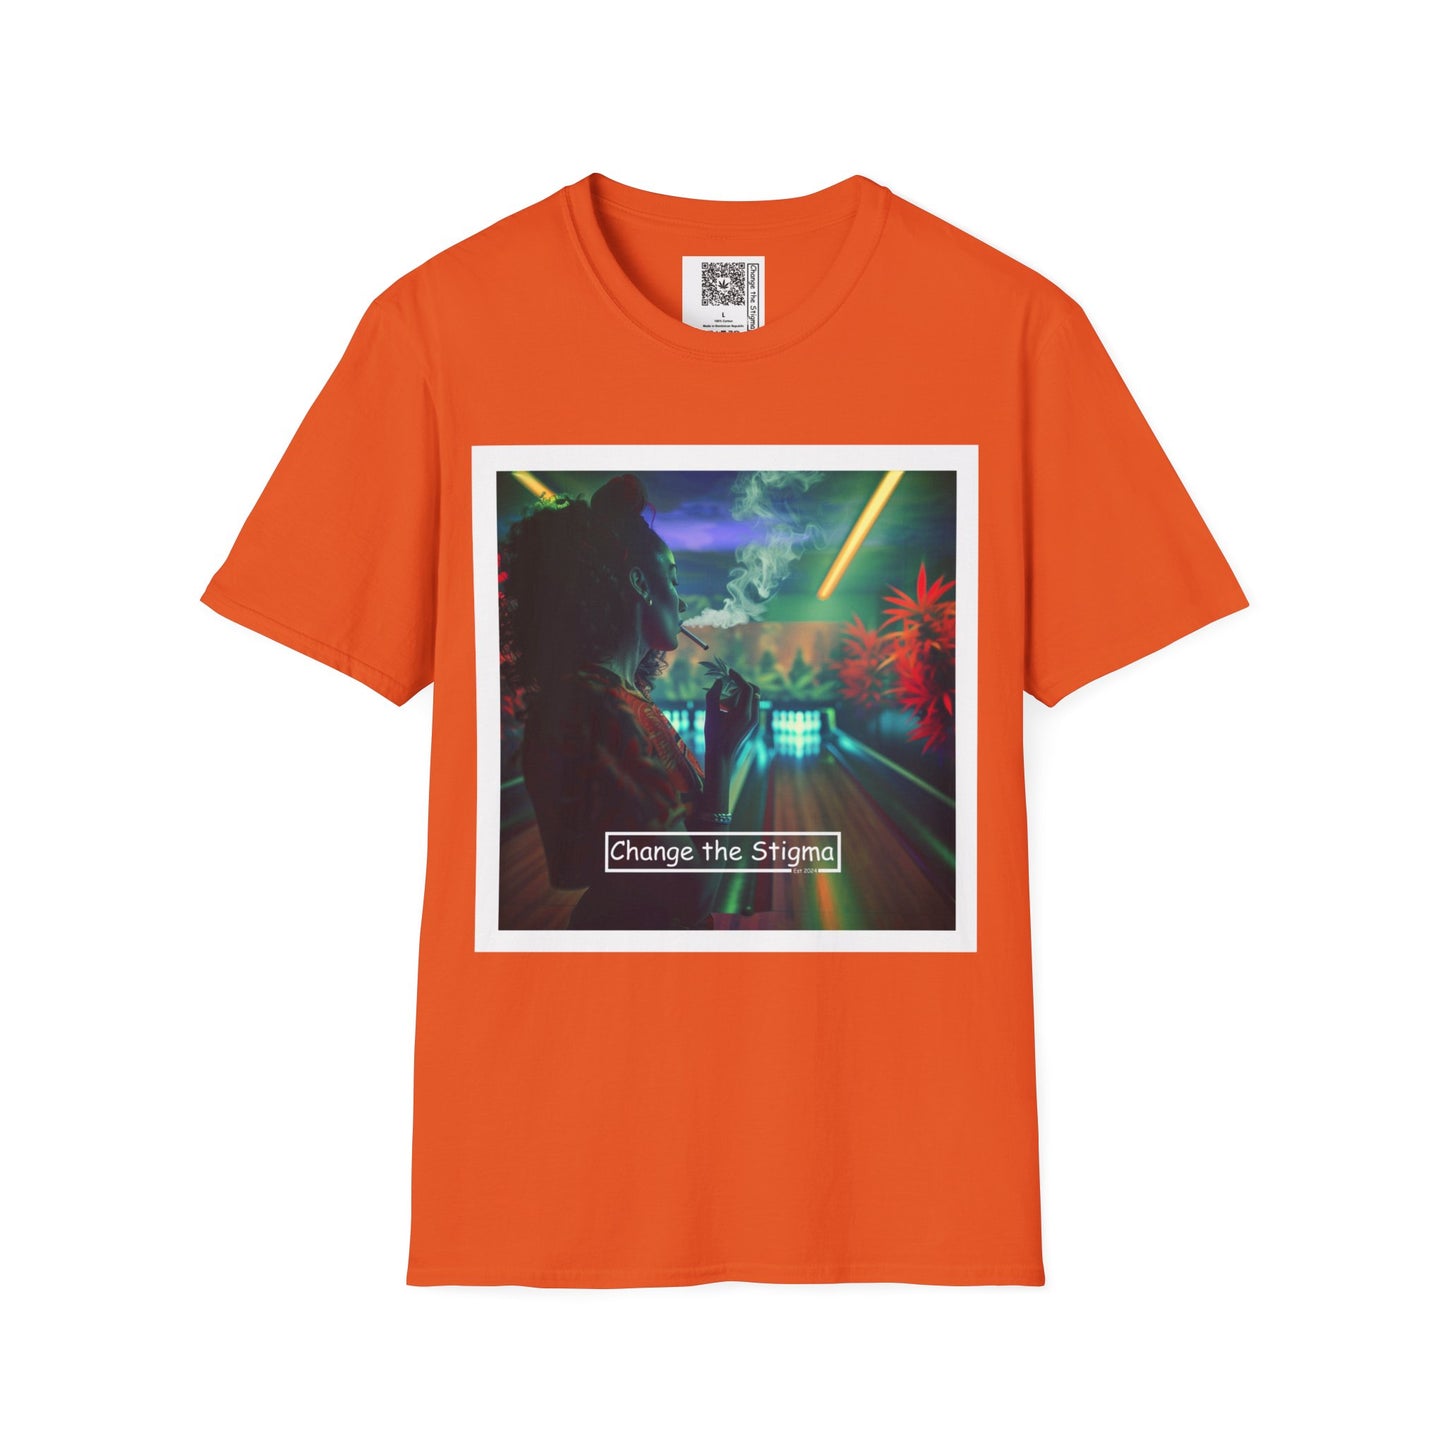 Change the Stigma, Orange color, shirt featuring a woman smoking cannabis while bowling, shirt is open displayed